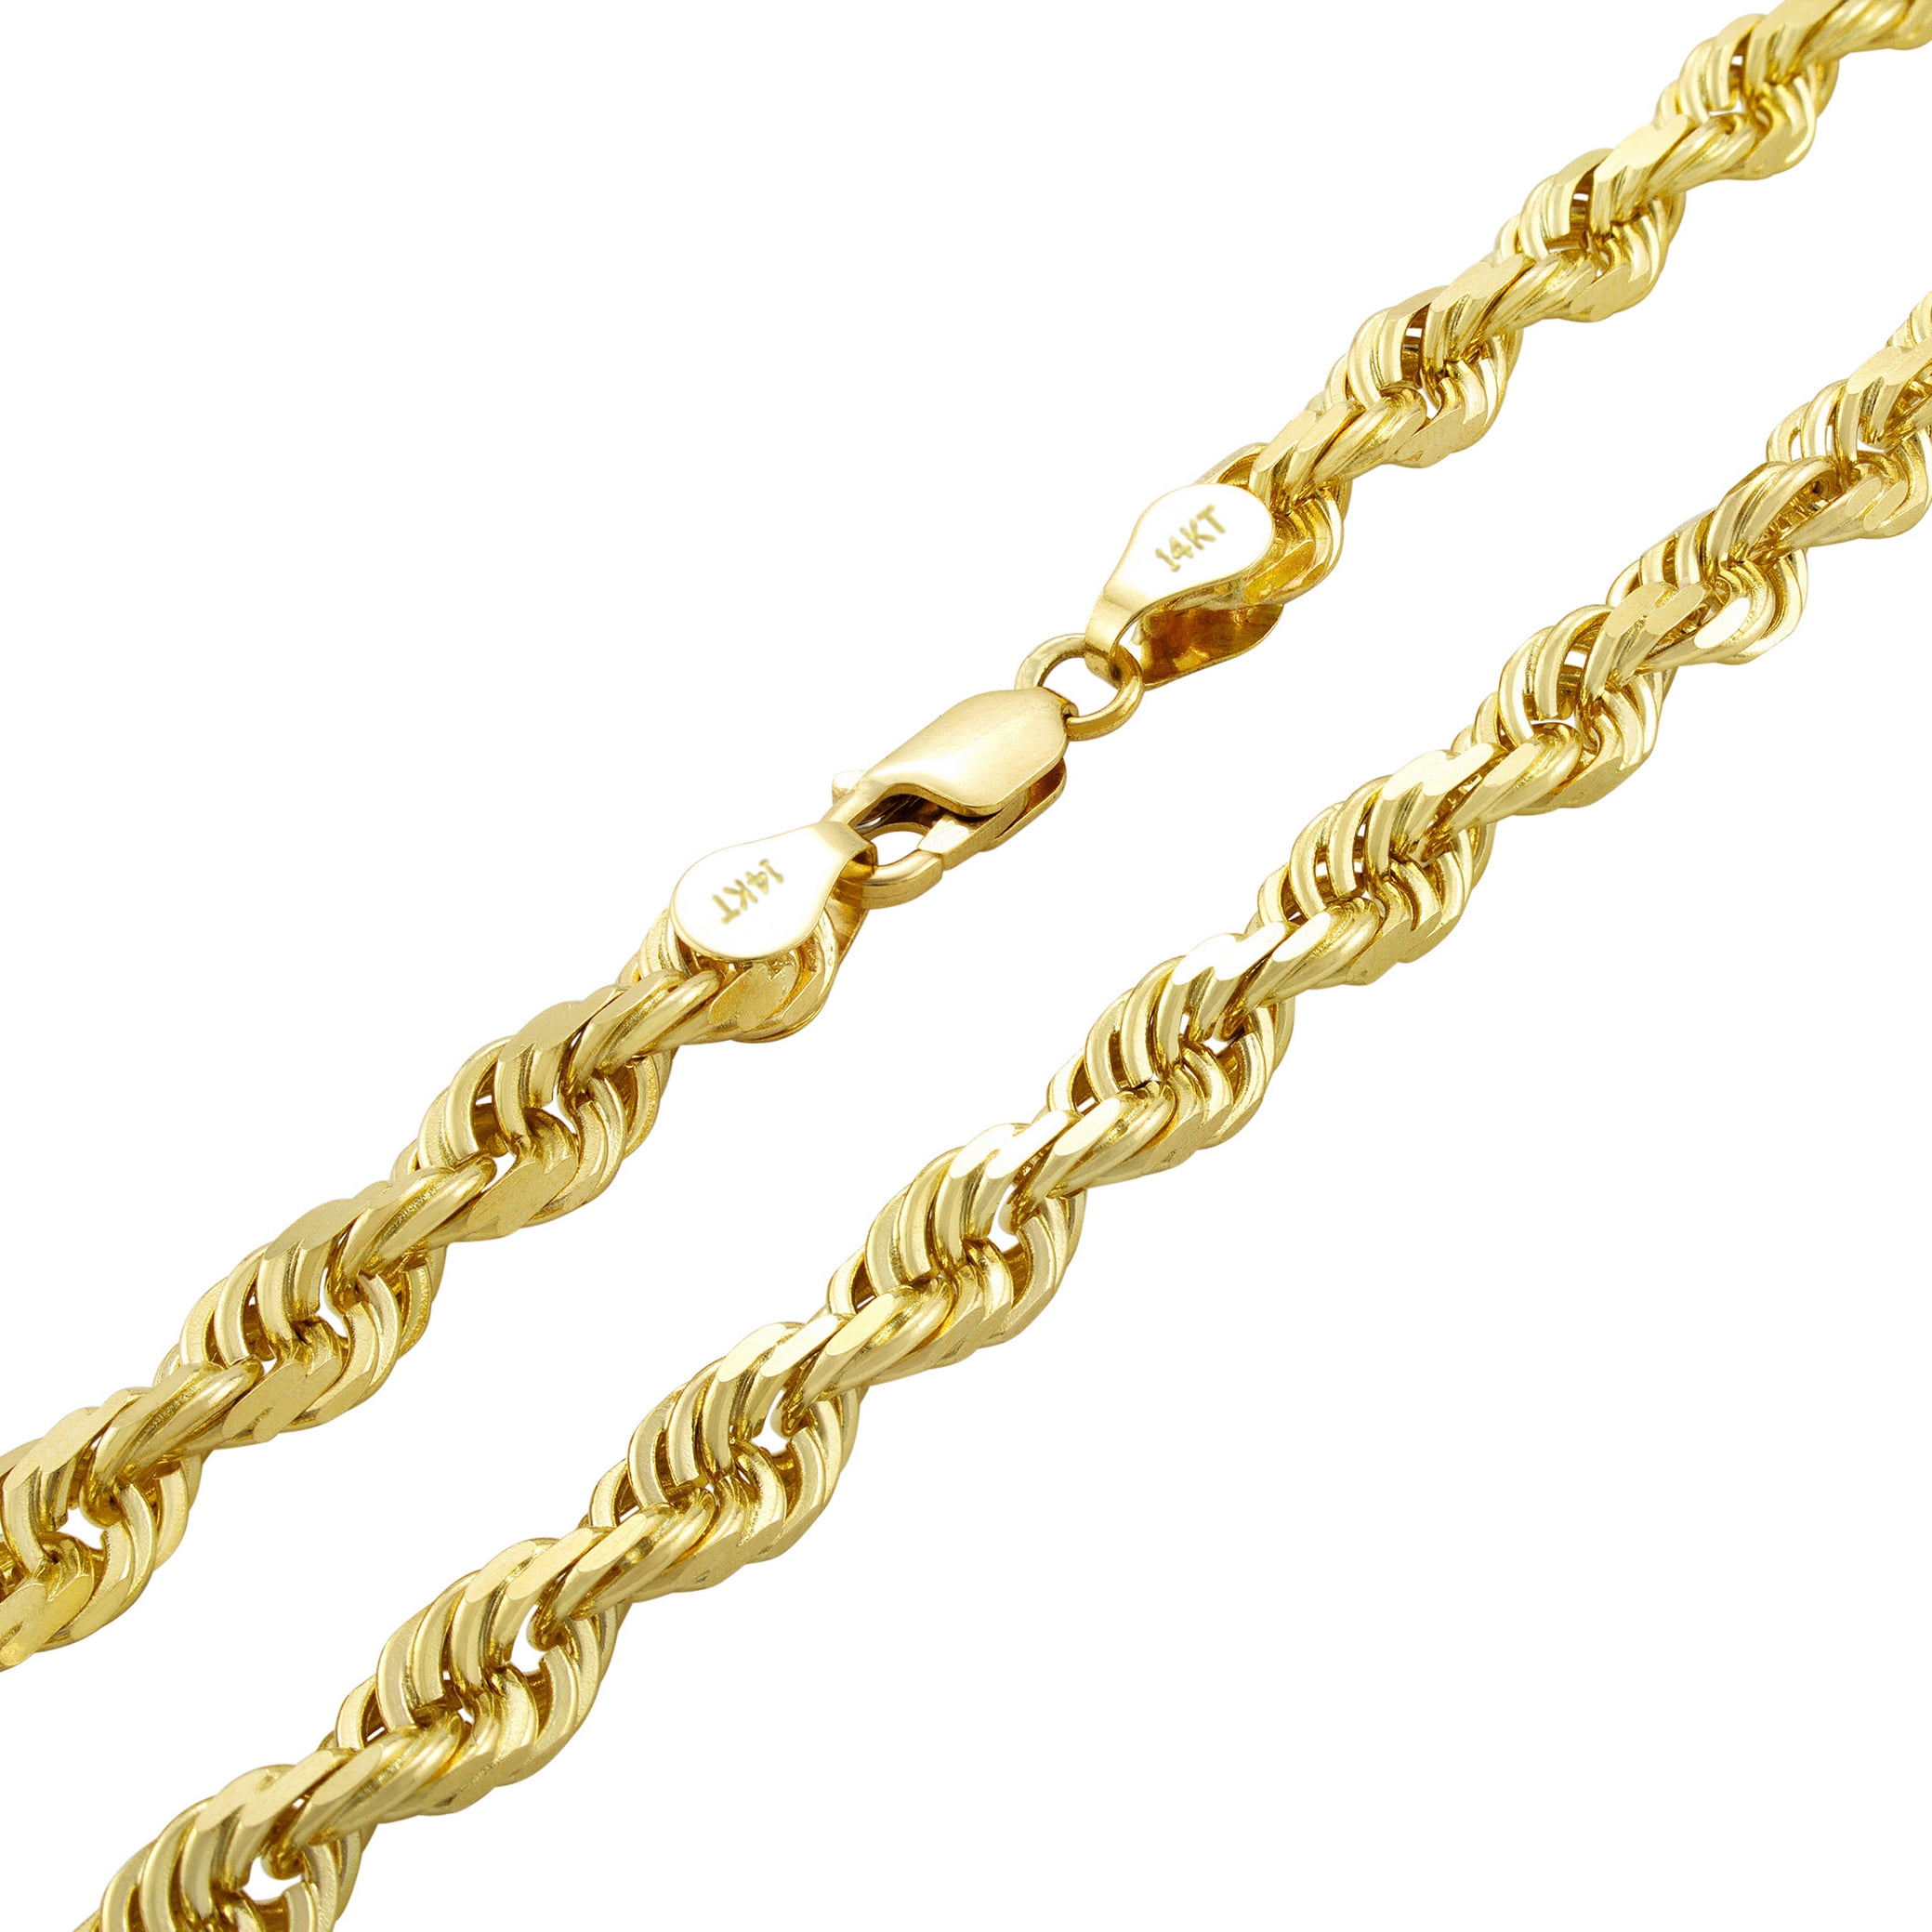 Nuragold 14k Yellow Gold 6mm Solid Rope Chain Diamond Cut Link Pendant  Necklace, Mens Jewelry 18 - 30 